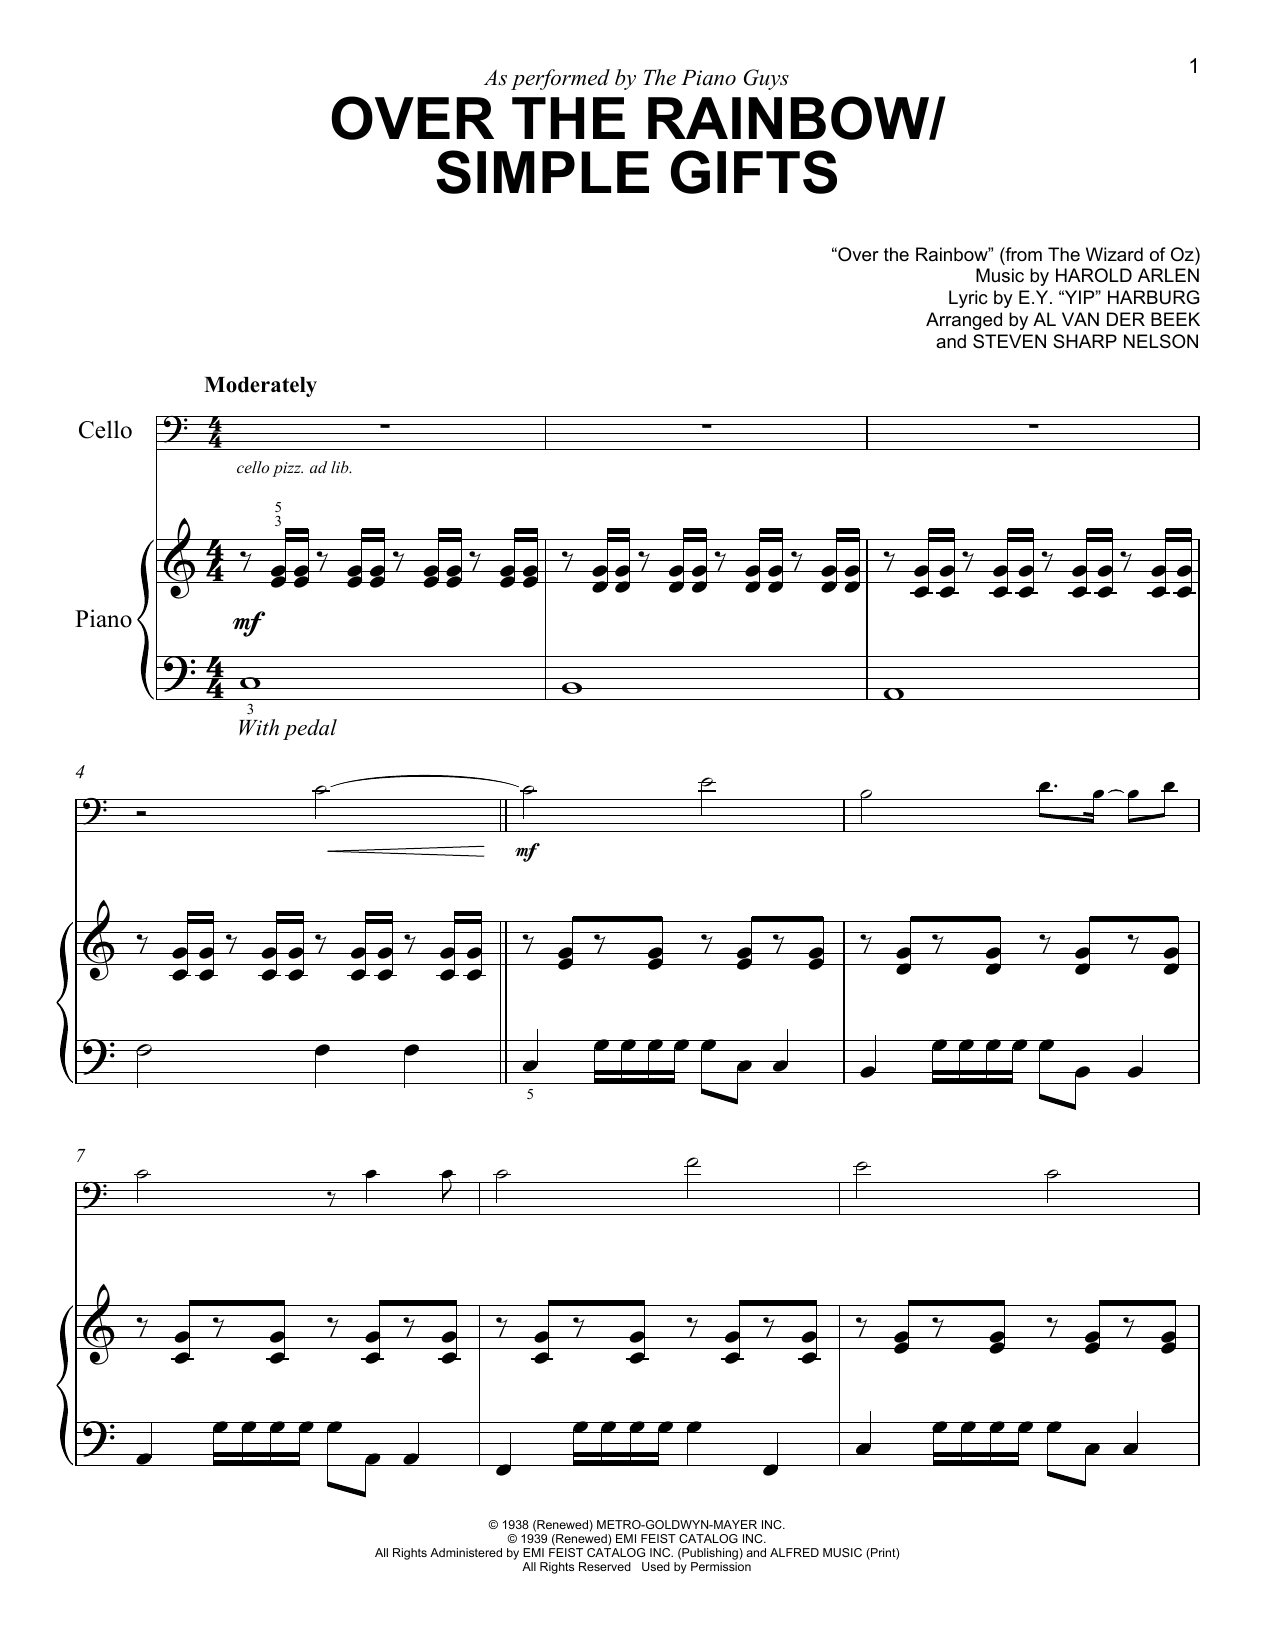 Download The Piano Guys Over The Rainbow / Simple Gifts Sheet Music